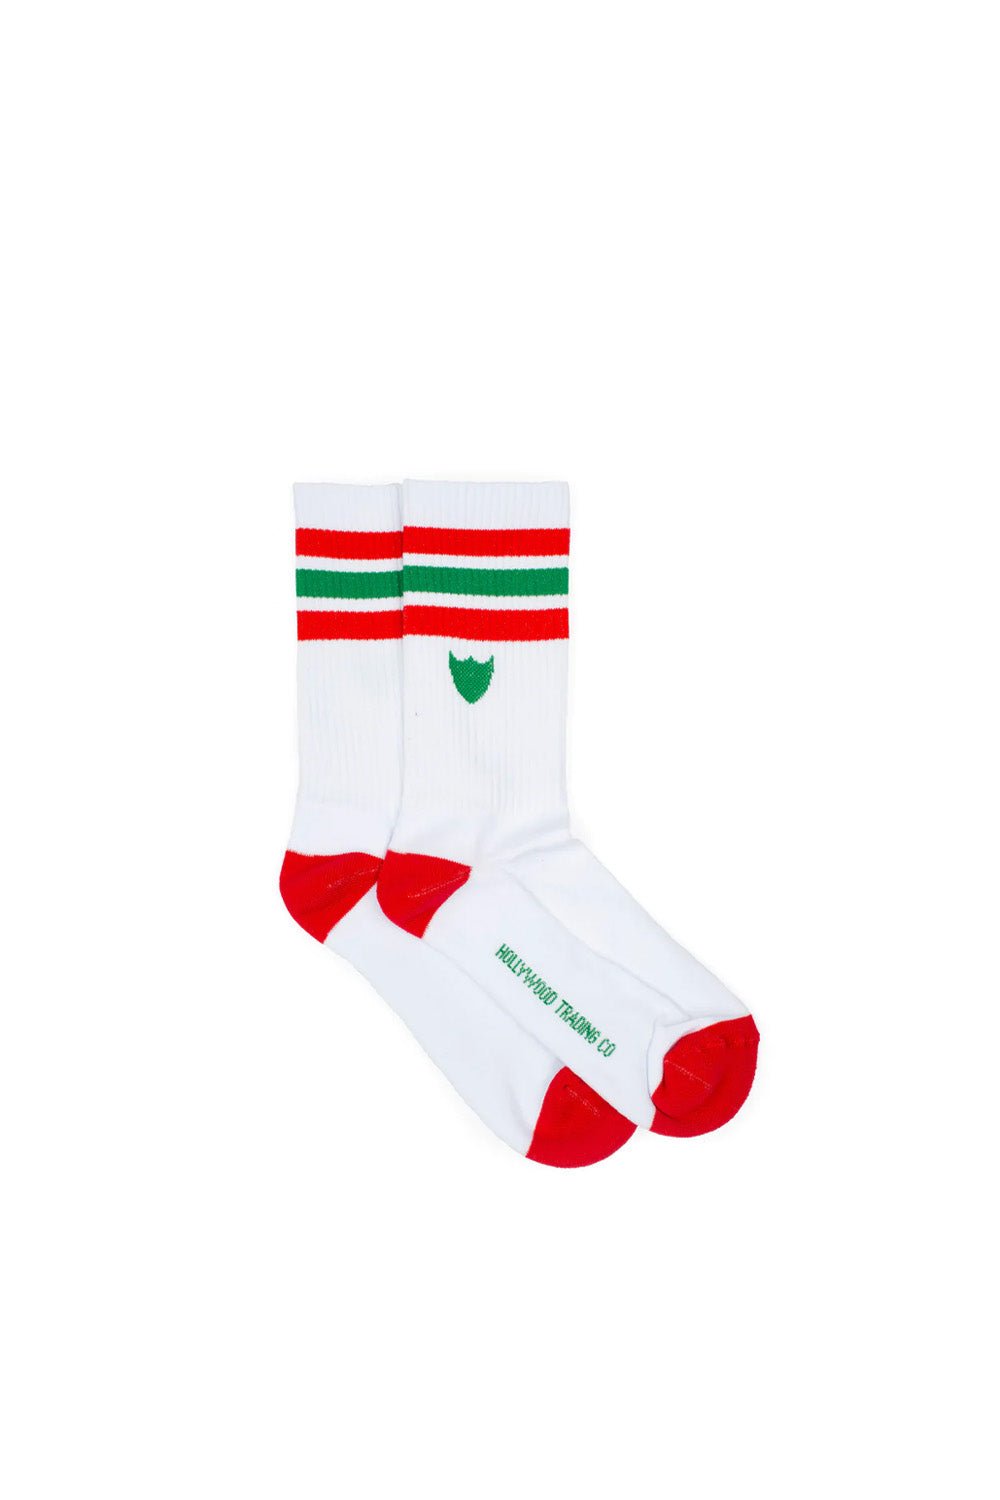 SHIELD FLAG WOMAN SOCKS Signature woman socks with Hollywood Trading Co script logo. 85% Cotton 10% Polyamide 5% Elastane. Made in Italy HTC LOS ANGELES